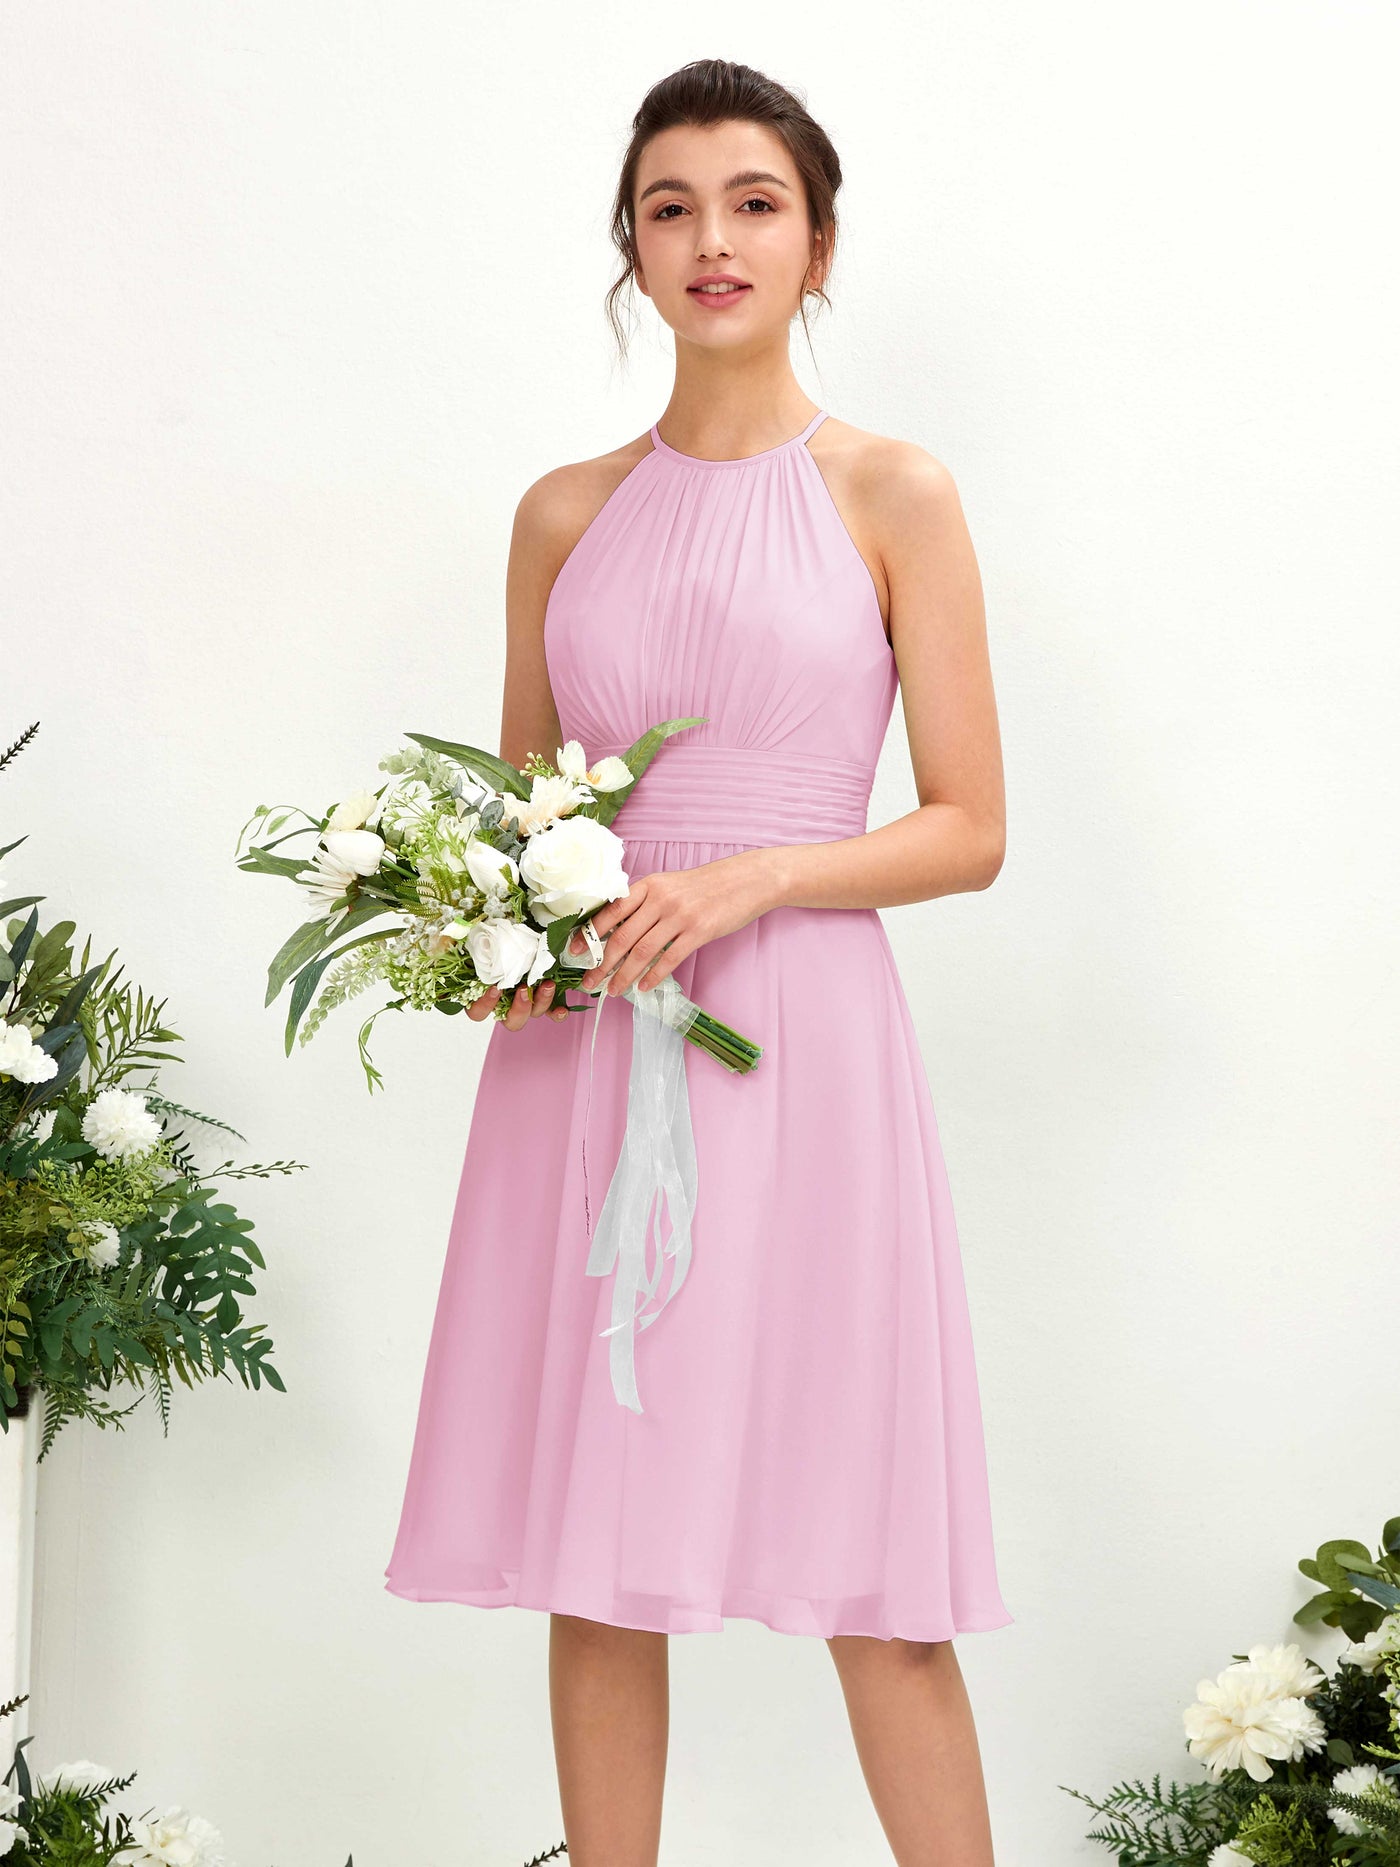 Candy Pink Bridesmaid Dresses Bridesmaid Dress A-line Chiffon Halter Knee Length Sleeveless Wedding Party Dress (81220139)#color_candy-pink